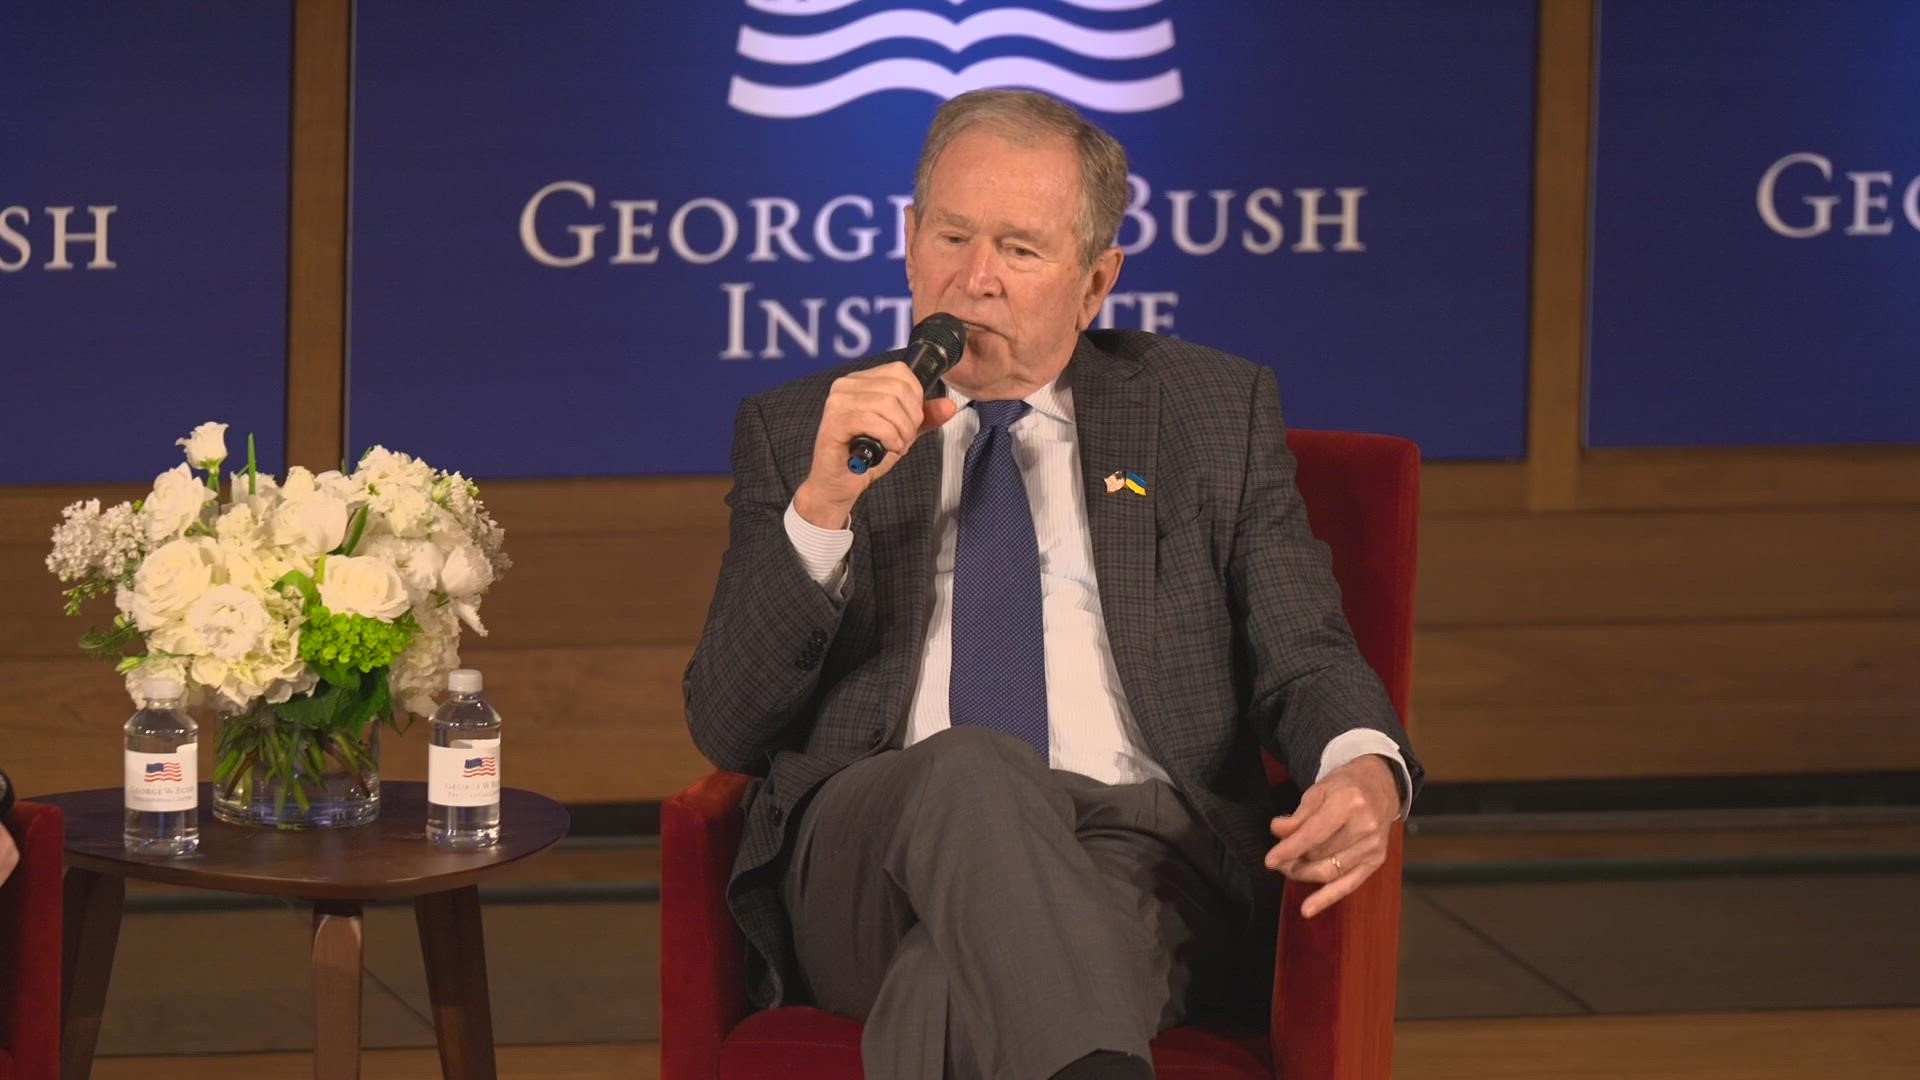 “There’s no bigger program than to have a young democracy bullied by its neighbor, an autocrat. We should care about the human condition elsewhere,” Bush said.